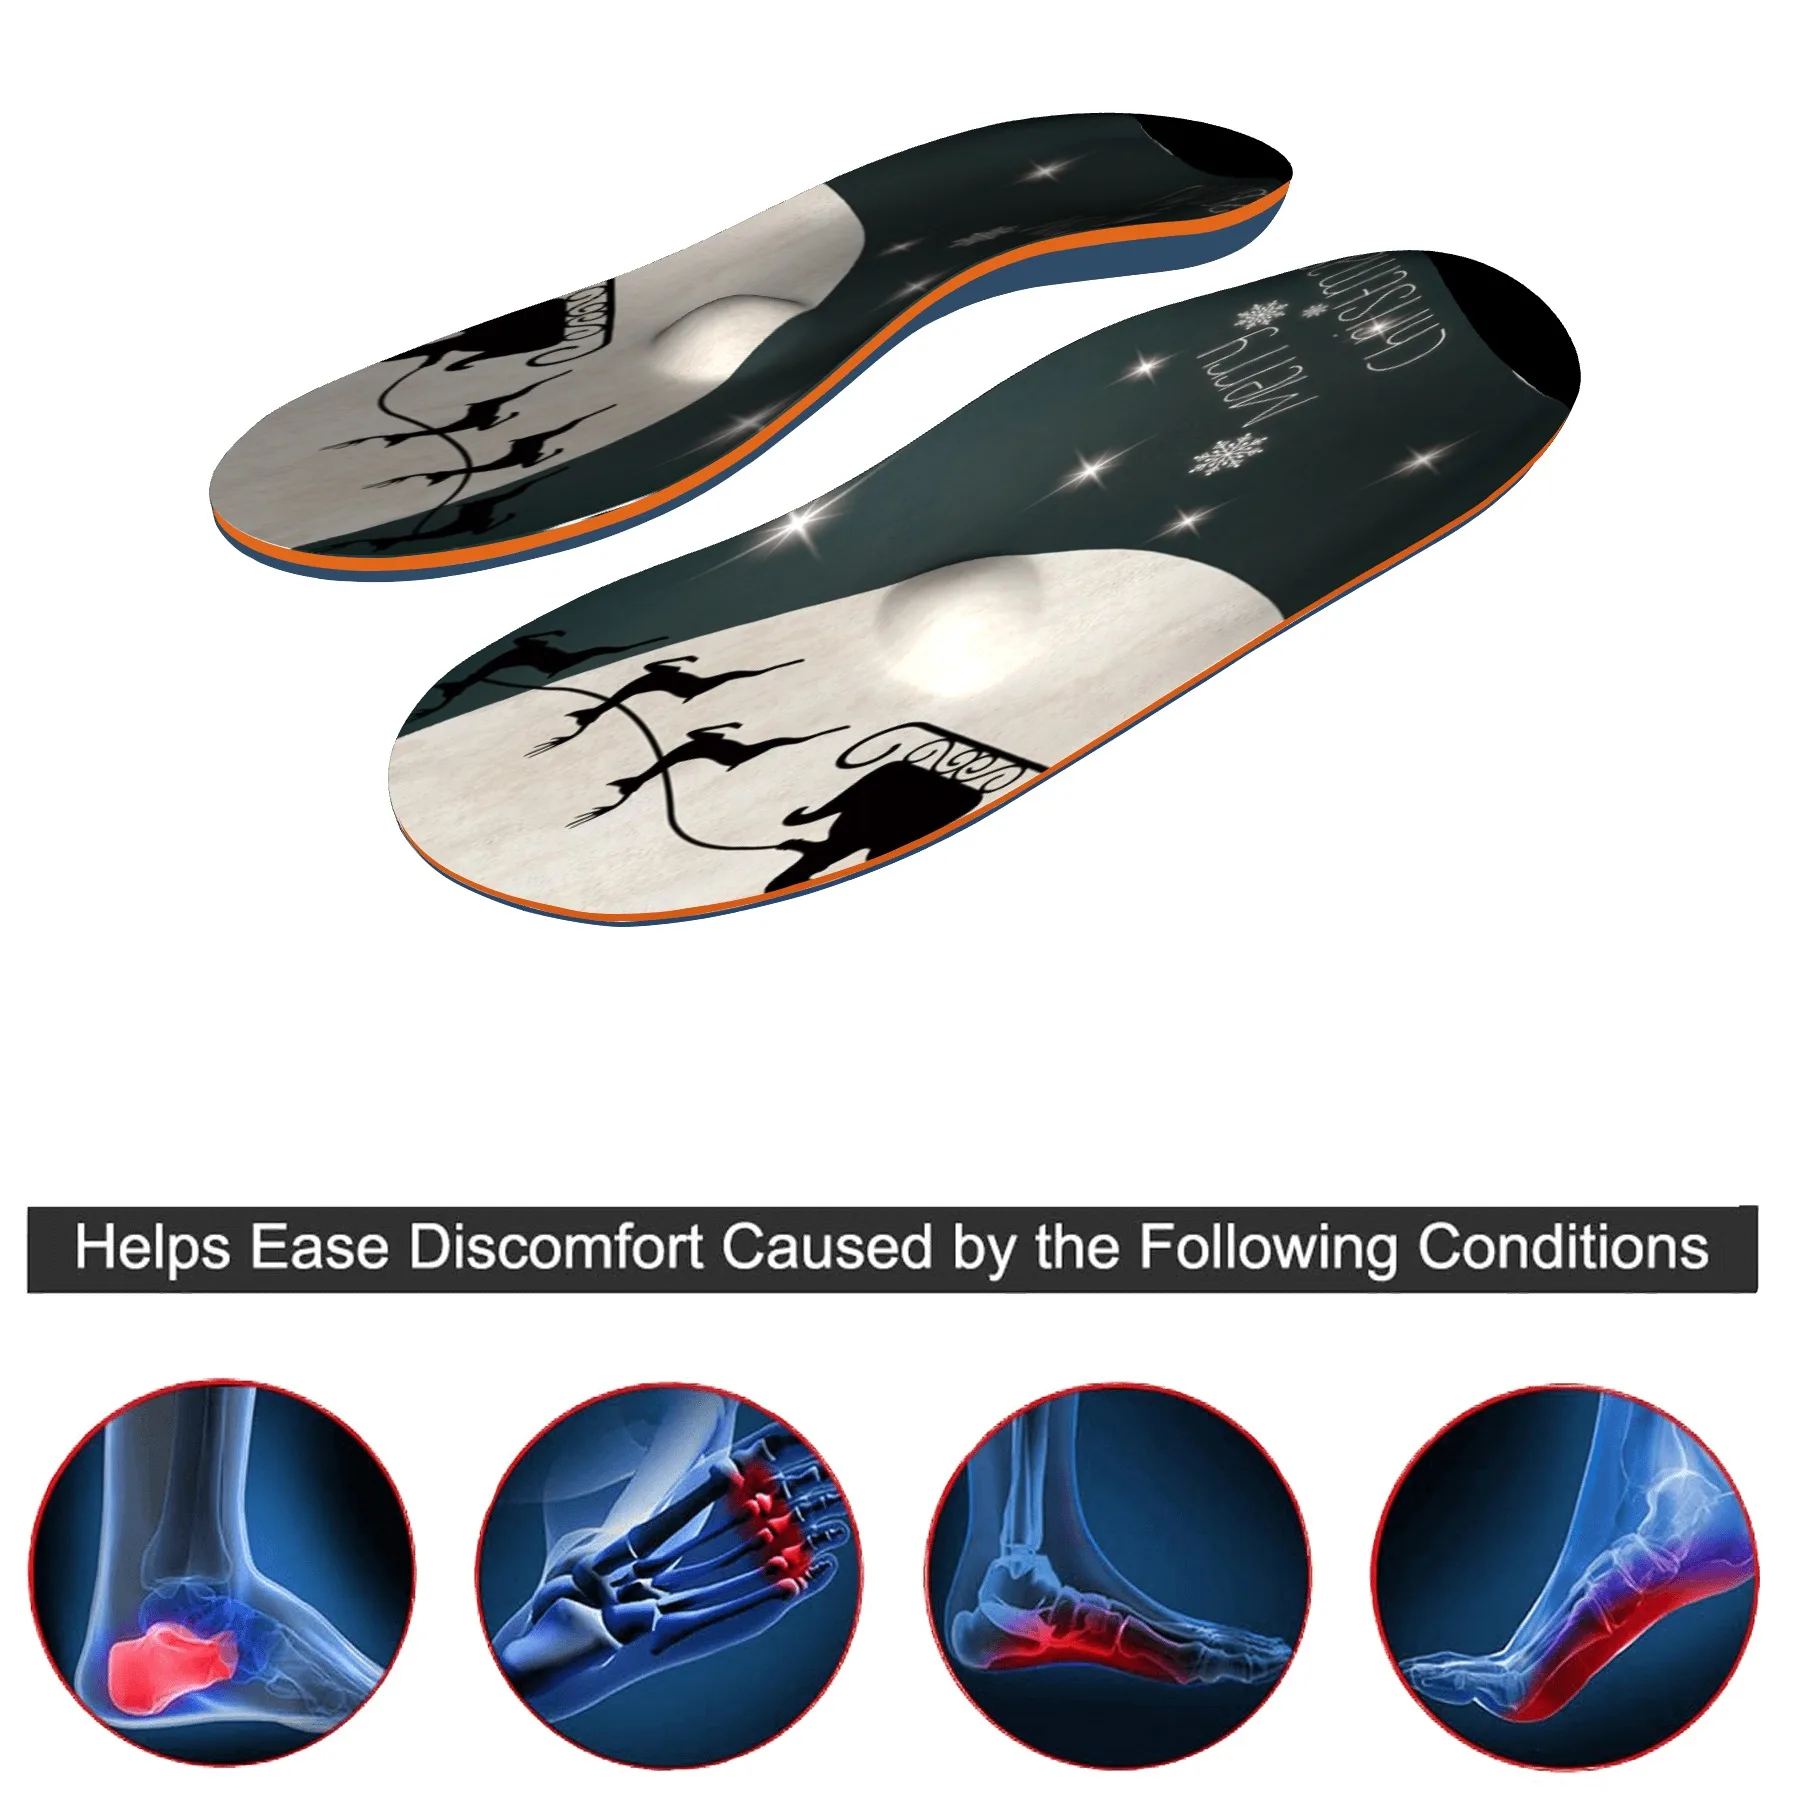 Christmas heel pain relief flat feet orthopedic arch support insoles Plantar fasciitis orthopedic insoles for men